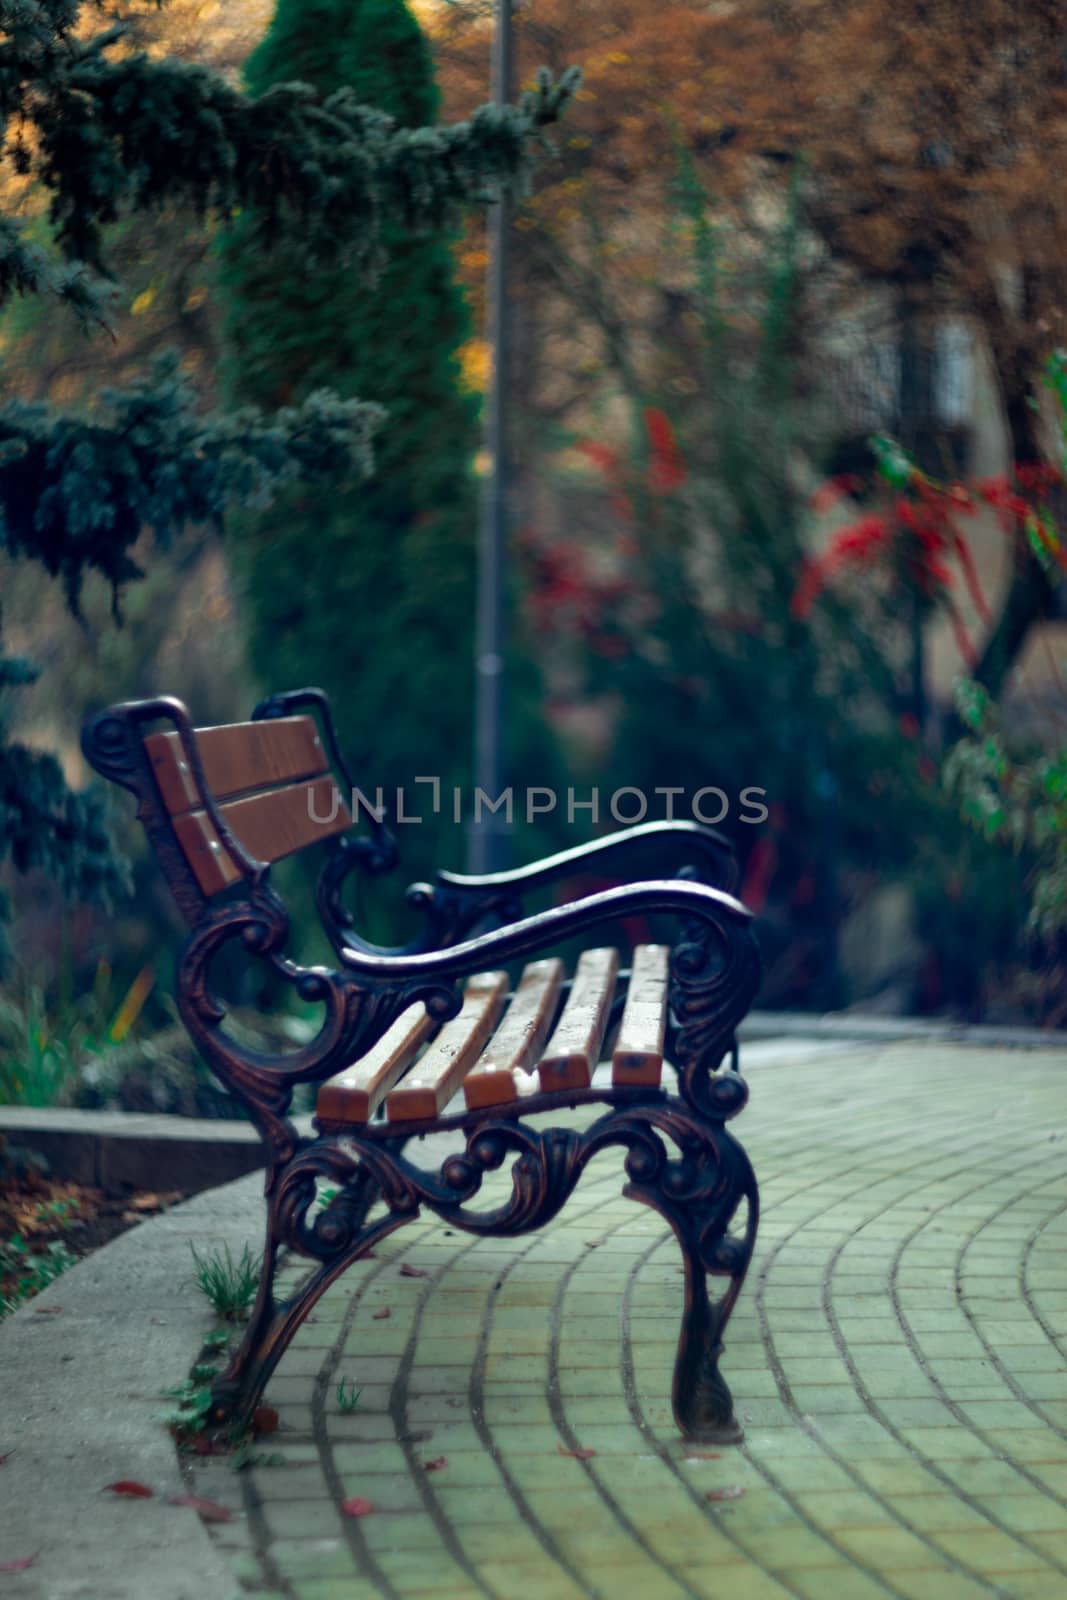 Bench in the park. It is autumn outside and there are some green trees in park. The background is blurred. by alexsdriver